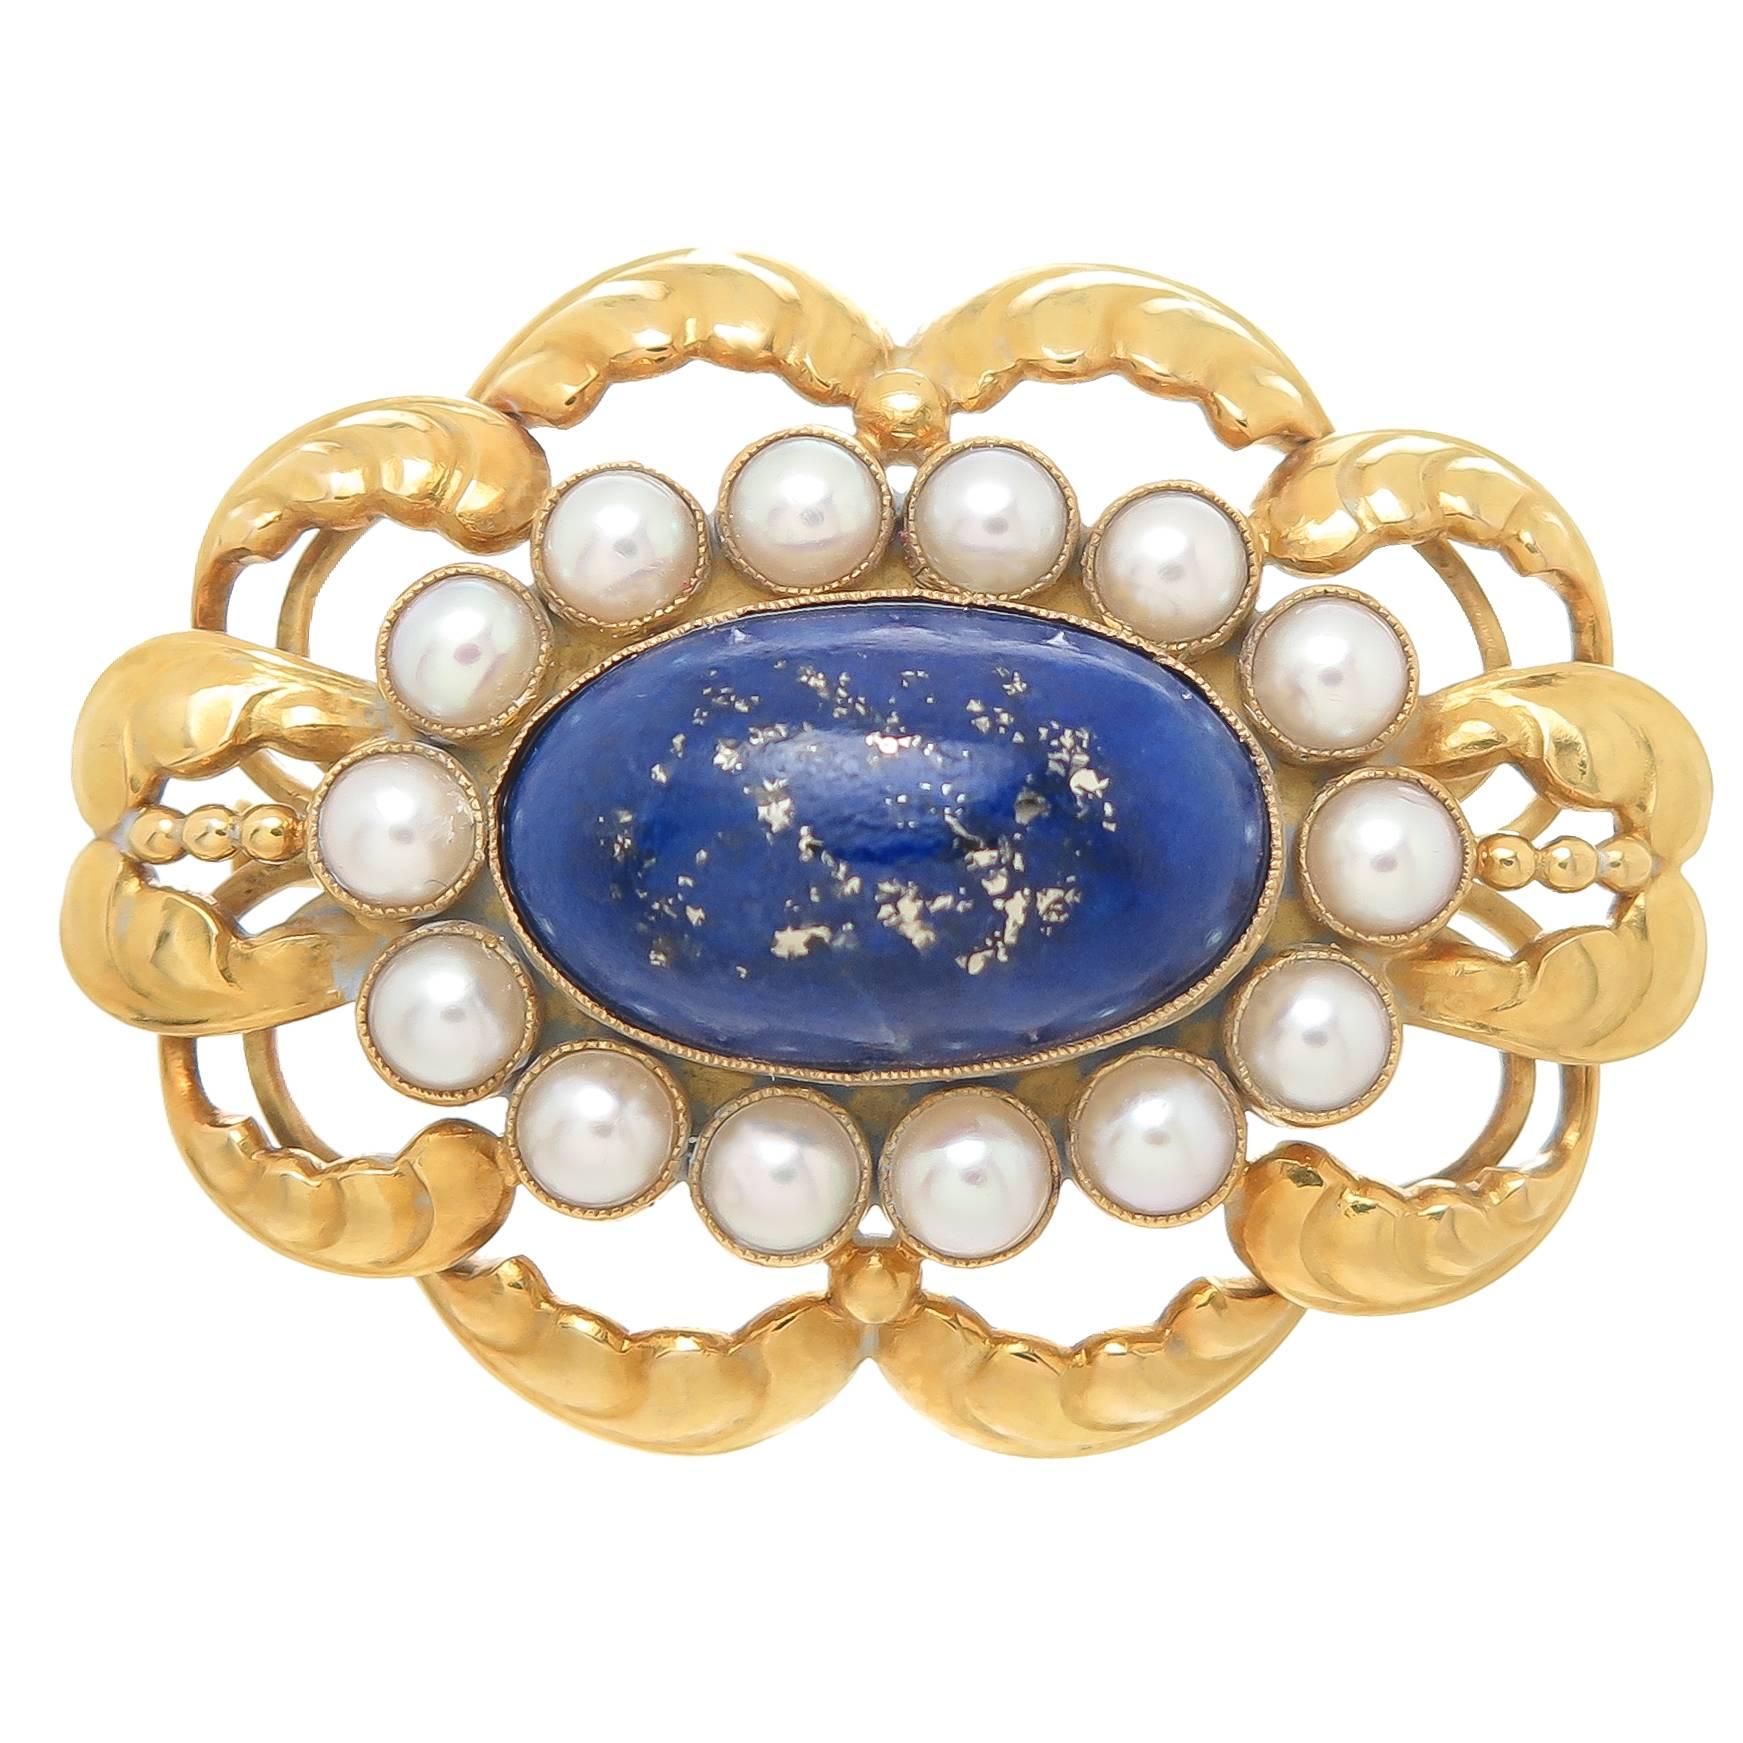 Georg Jensen Rare Yellow Gold Lapis and Pearl Brooch